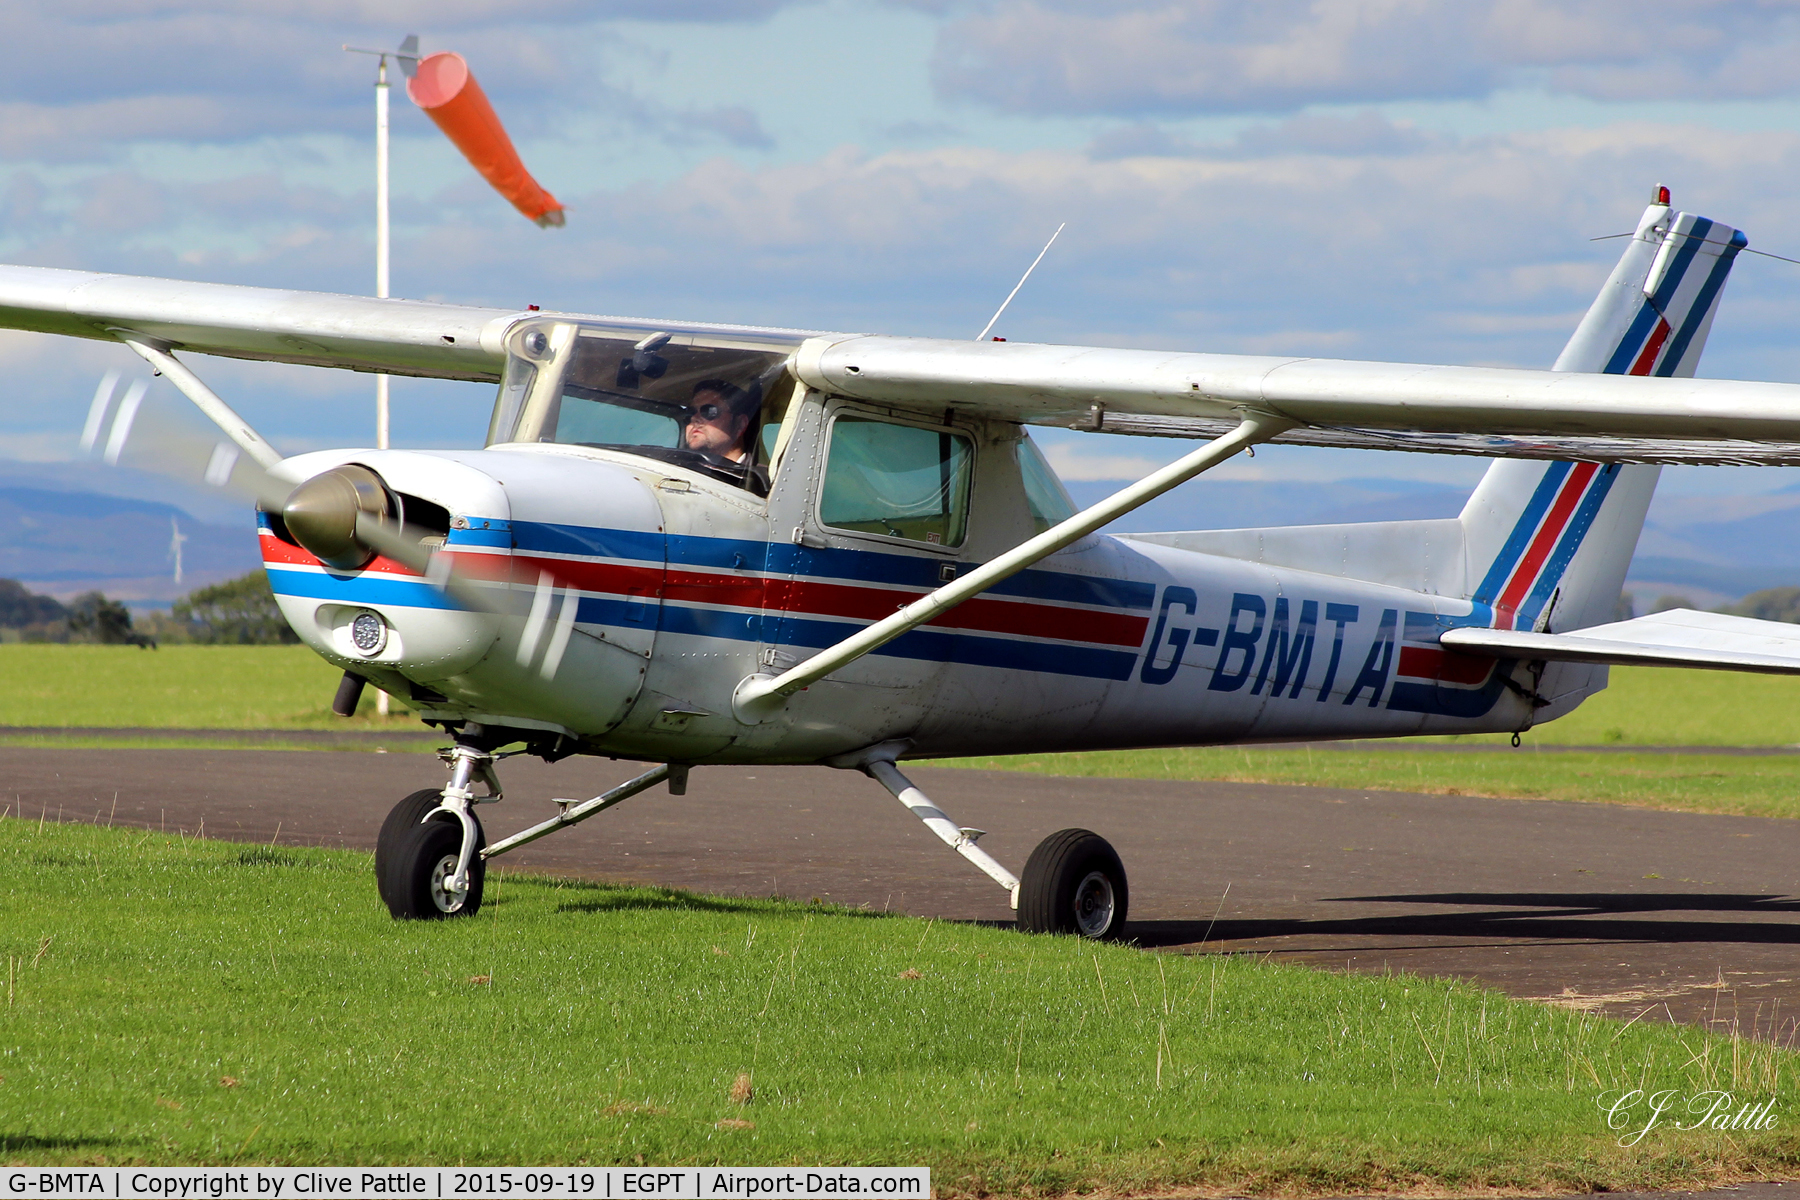 G-BMTA, 1979 Cessna 152 C/N 152-82864, Mounting the grass at Perth EGPT